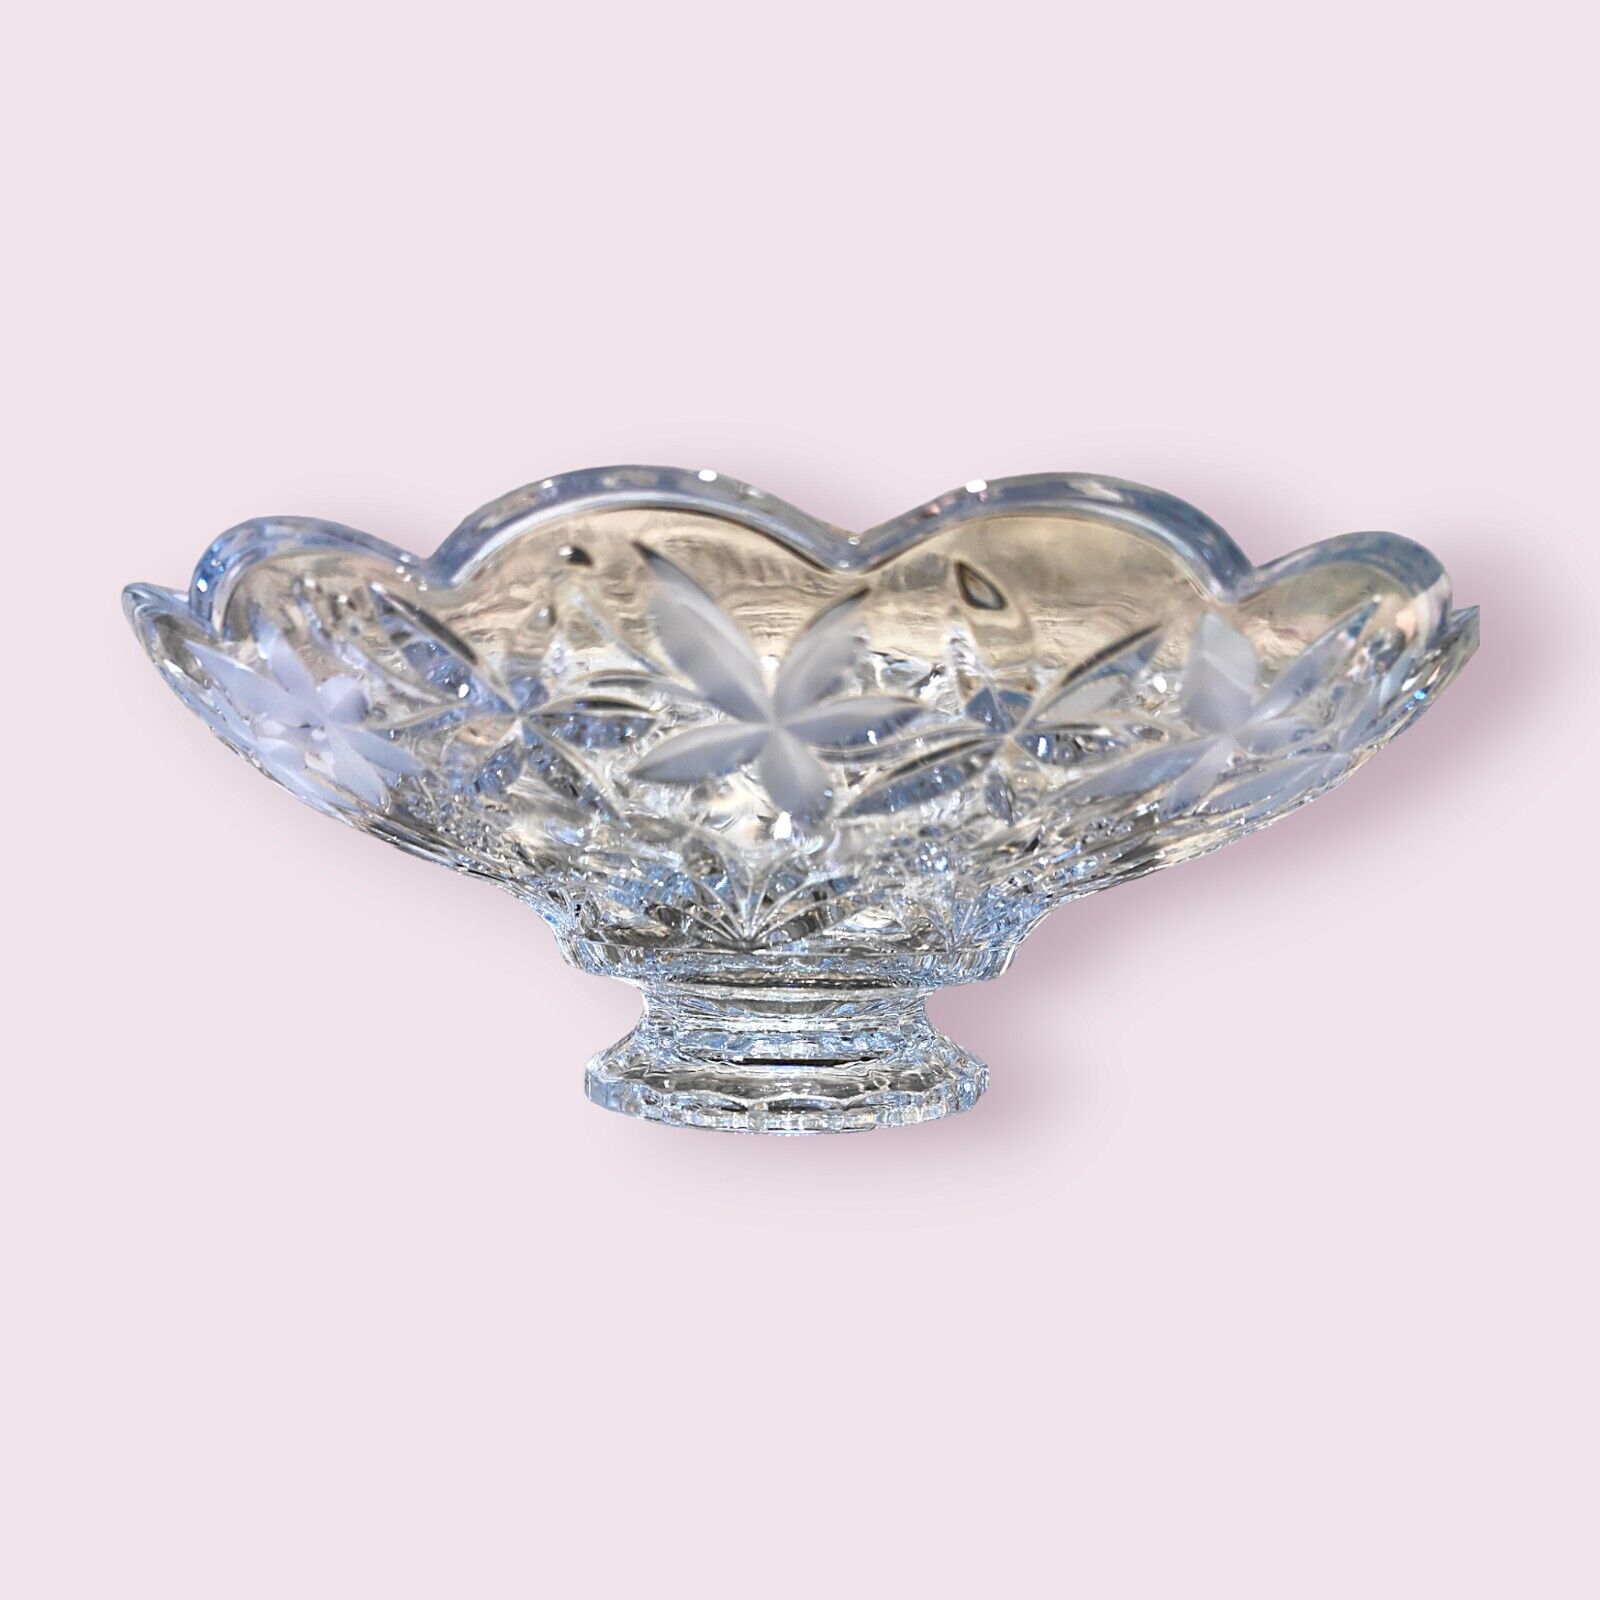 Vintage Mikasa Crystal Centerpiece Bowl With Floral Design. Stunning Clarity